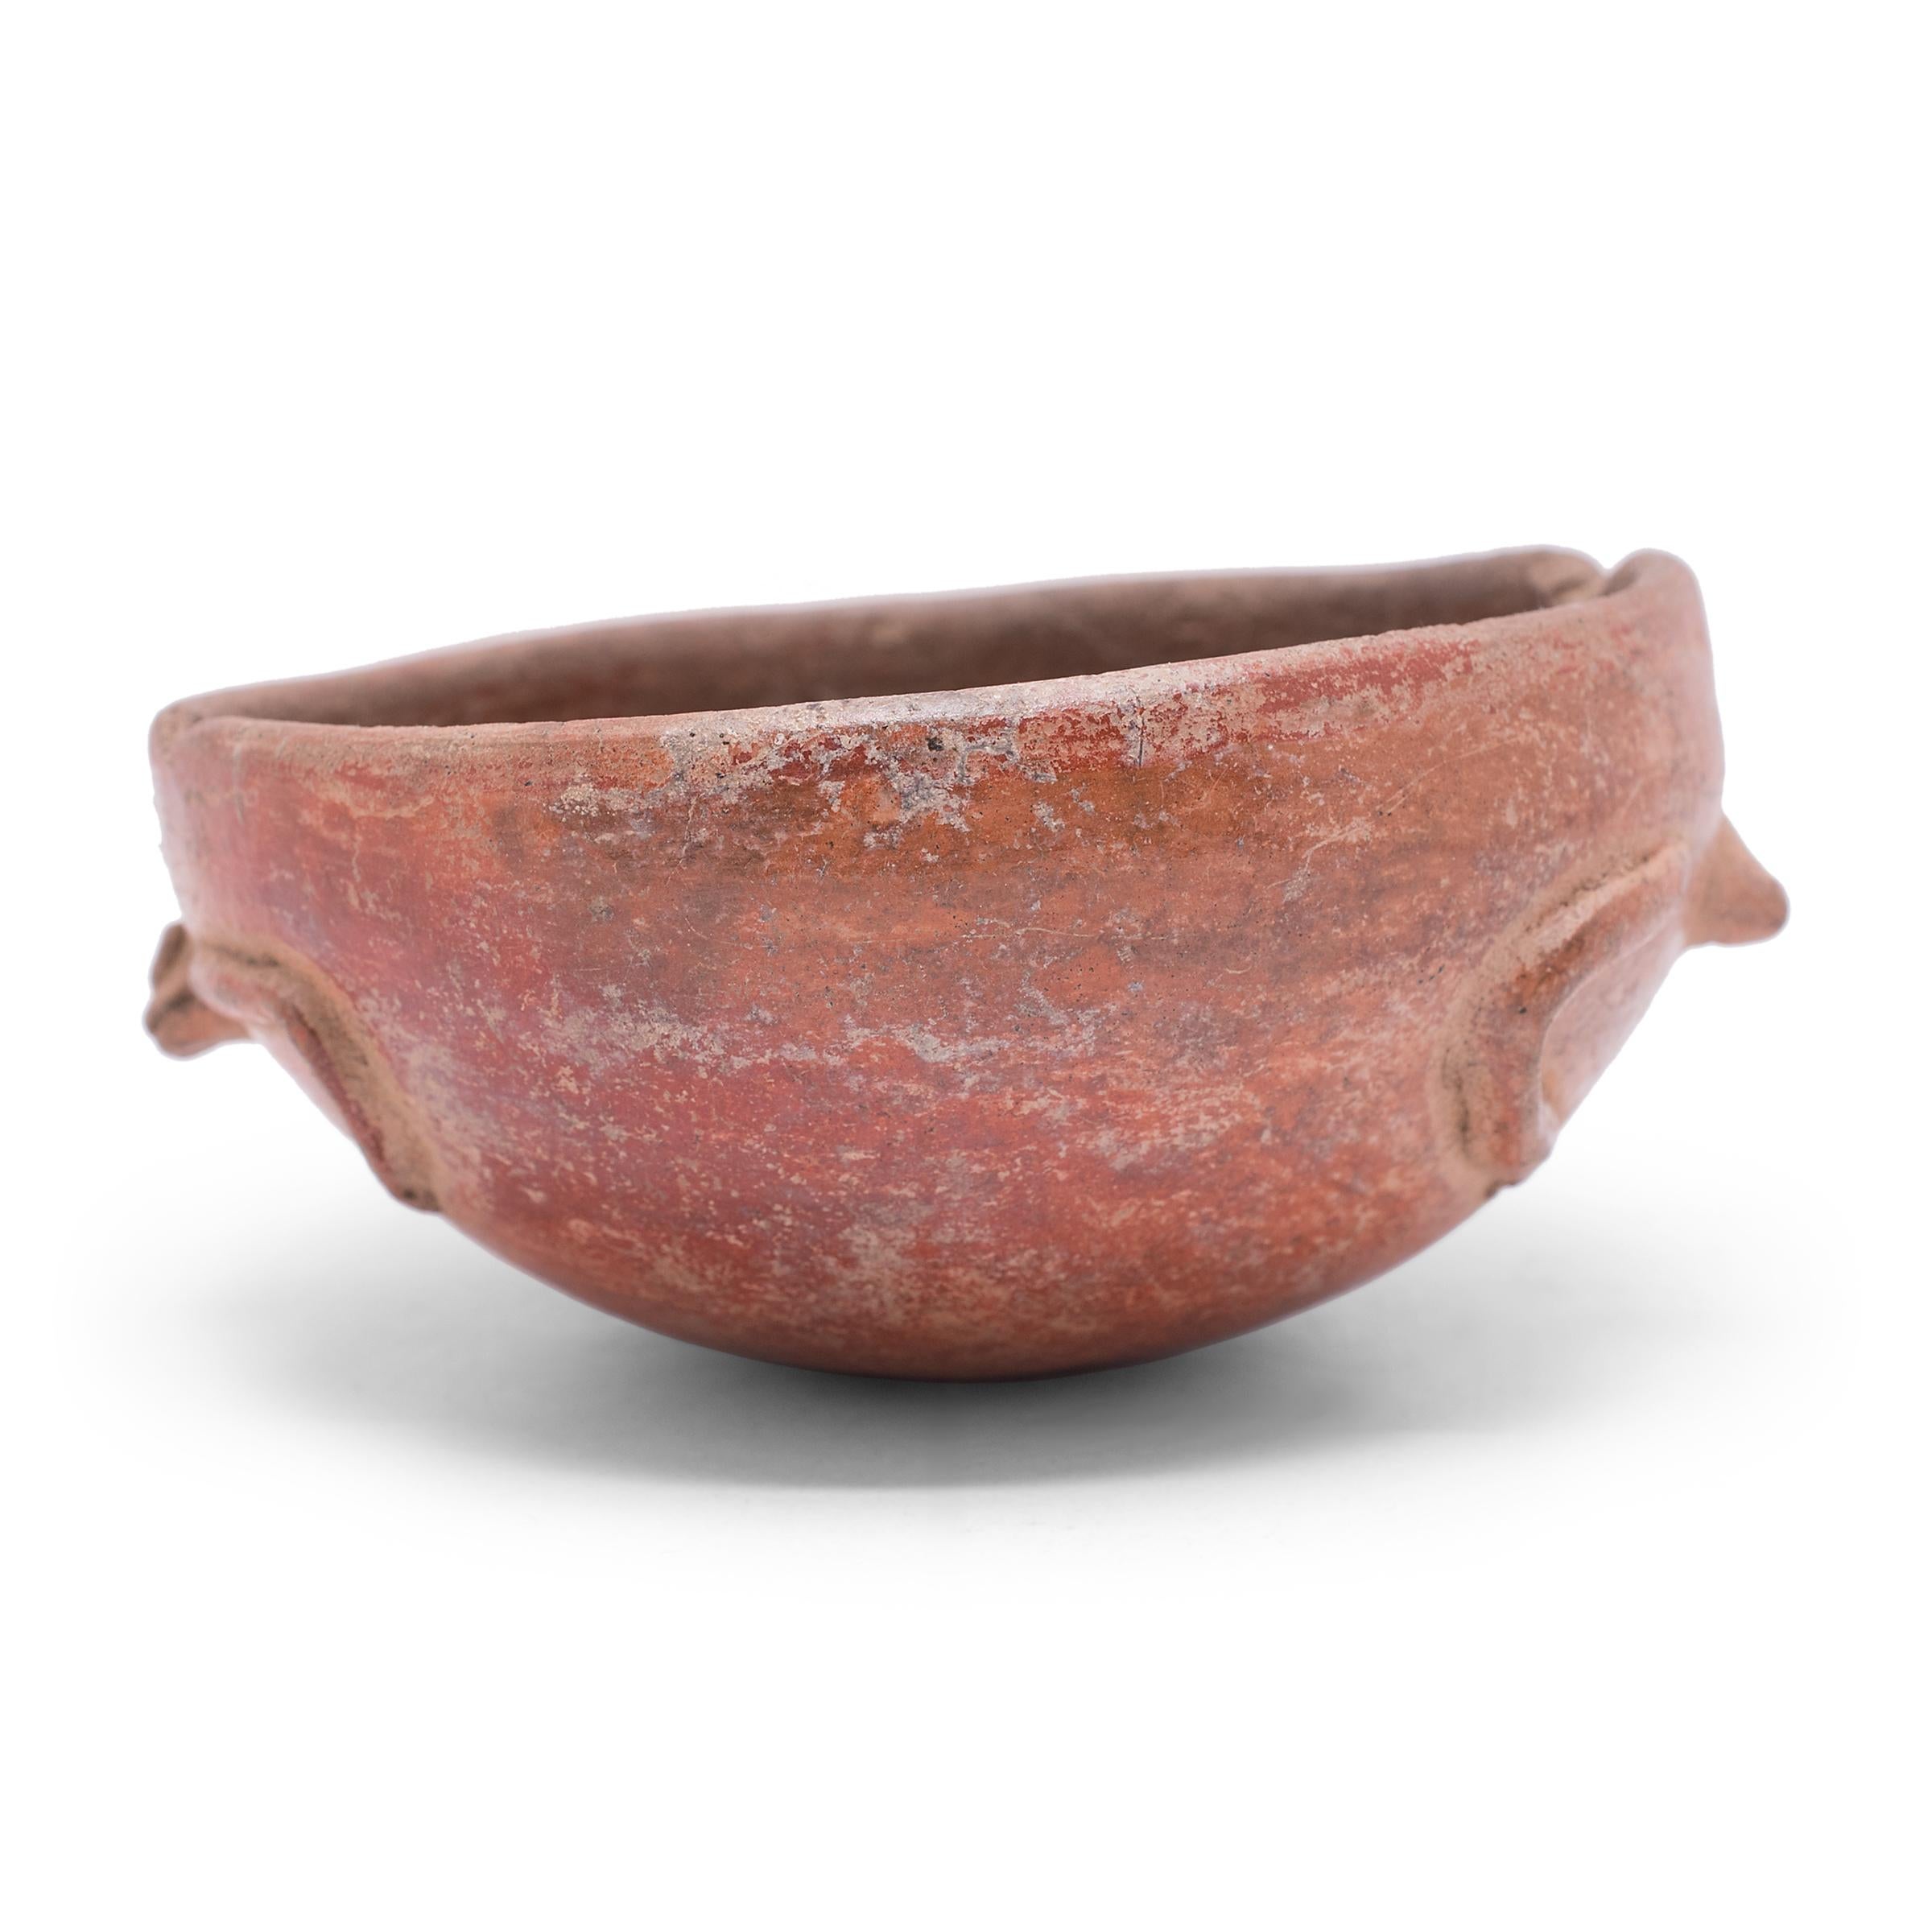 Exhibiting a rich patina, this petite redware bowl is attributed to Maya culture and shows many telltale signs of Pre-Columbian pottery. Speckled with imperfections, the vessel's warm red-orange coloration was achieved by applying a mineral-rich